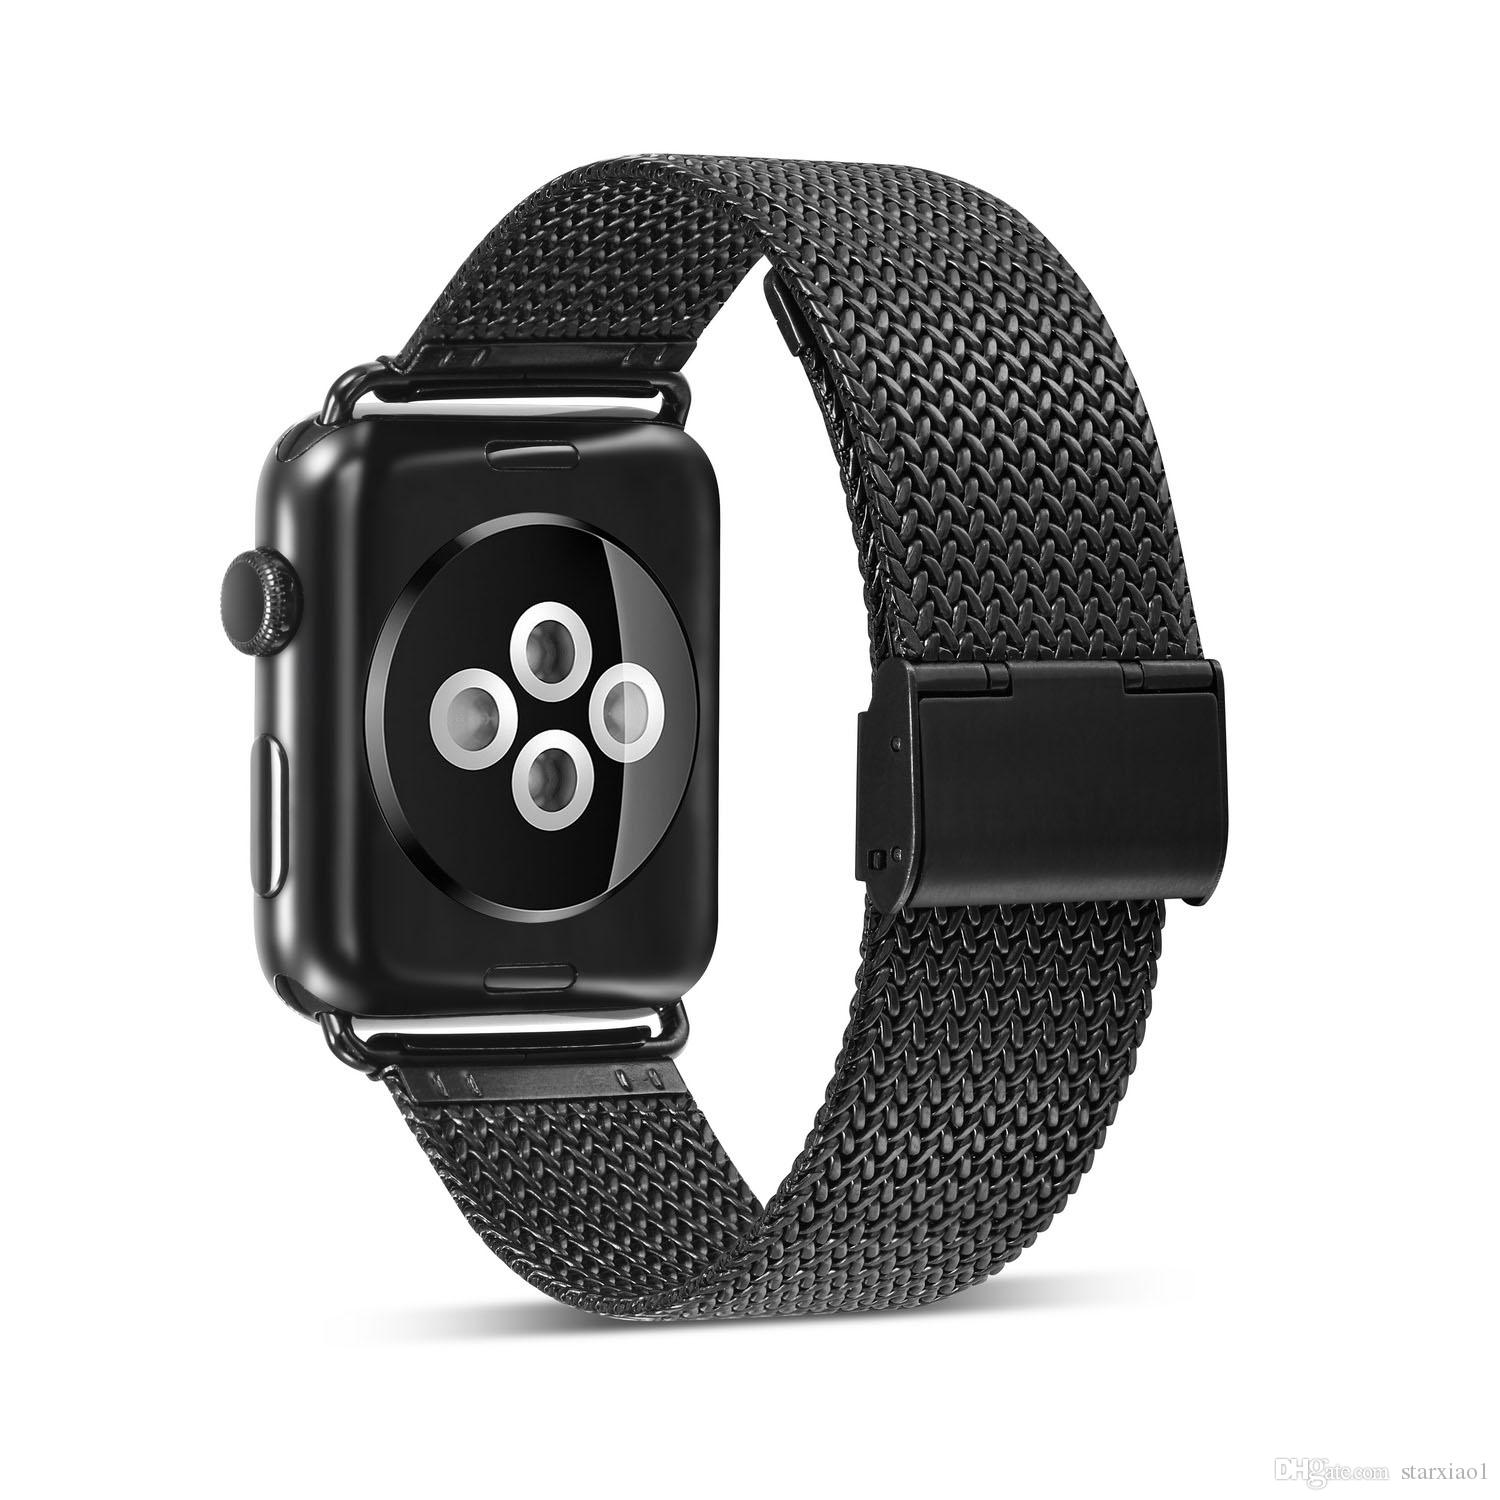 Double Buckle Milanese Loop Stainless Steel Watchband for Apple Watch Series 4/3/2/1 42mm 38 mm Strap For iwatch Band 40/44mm